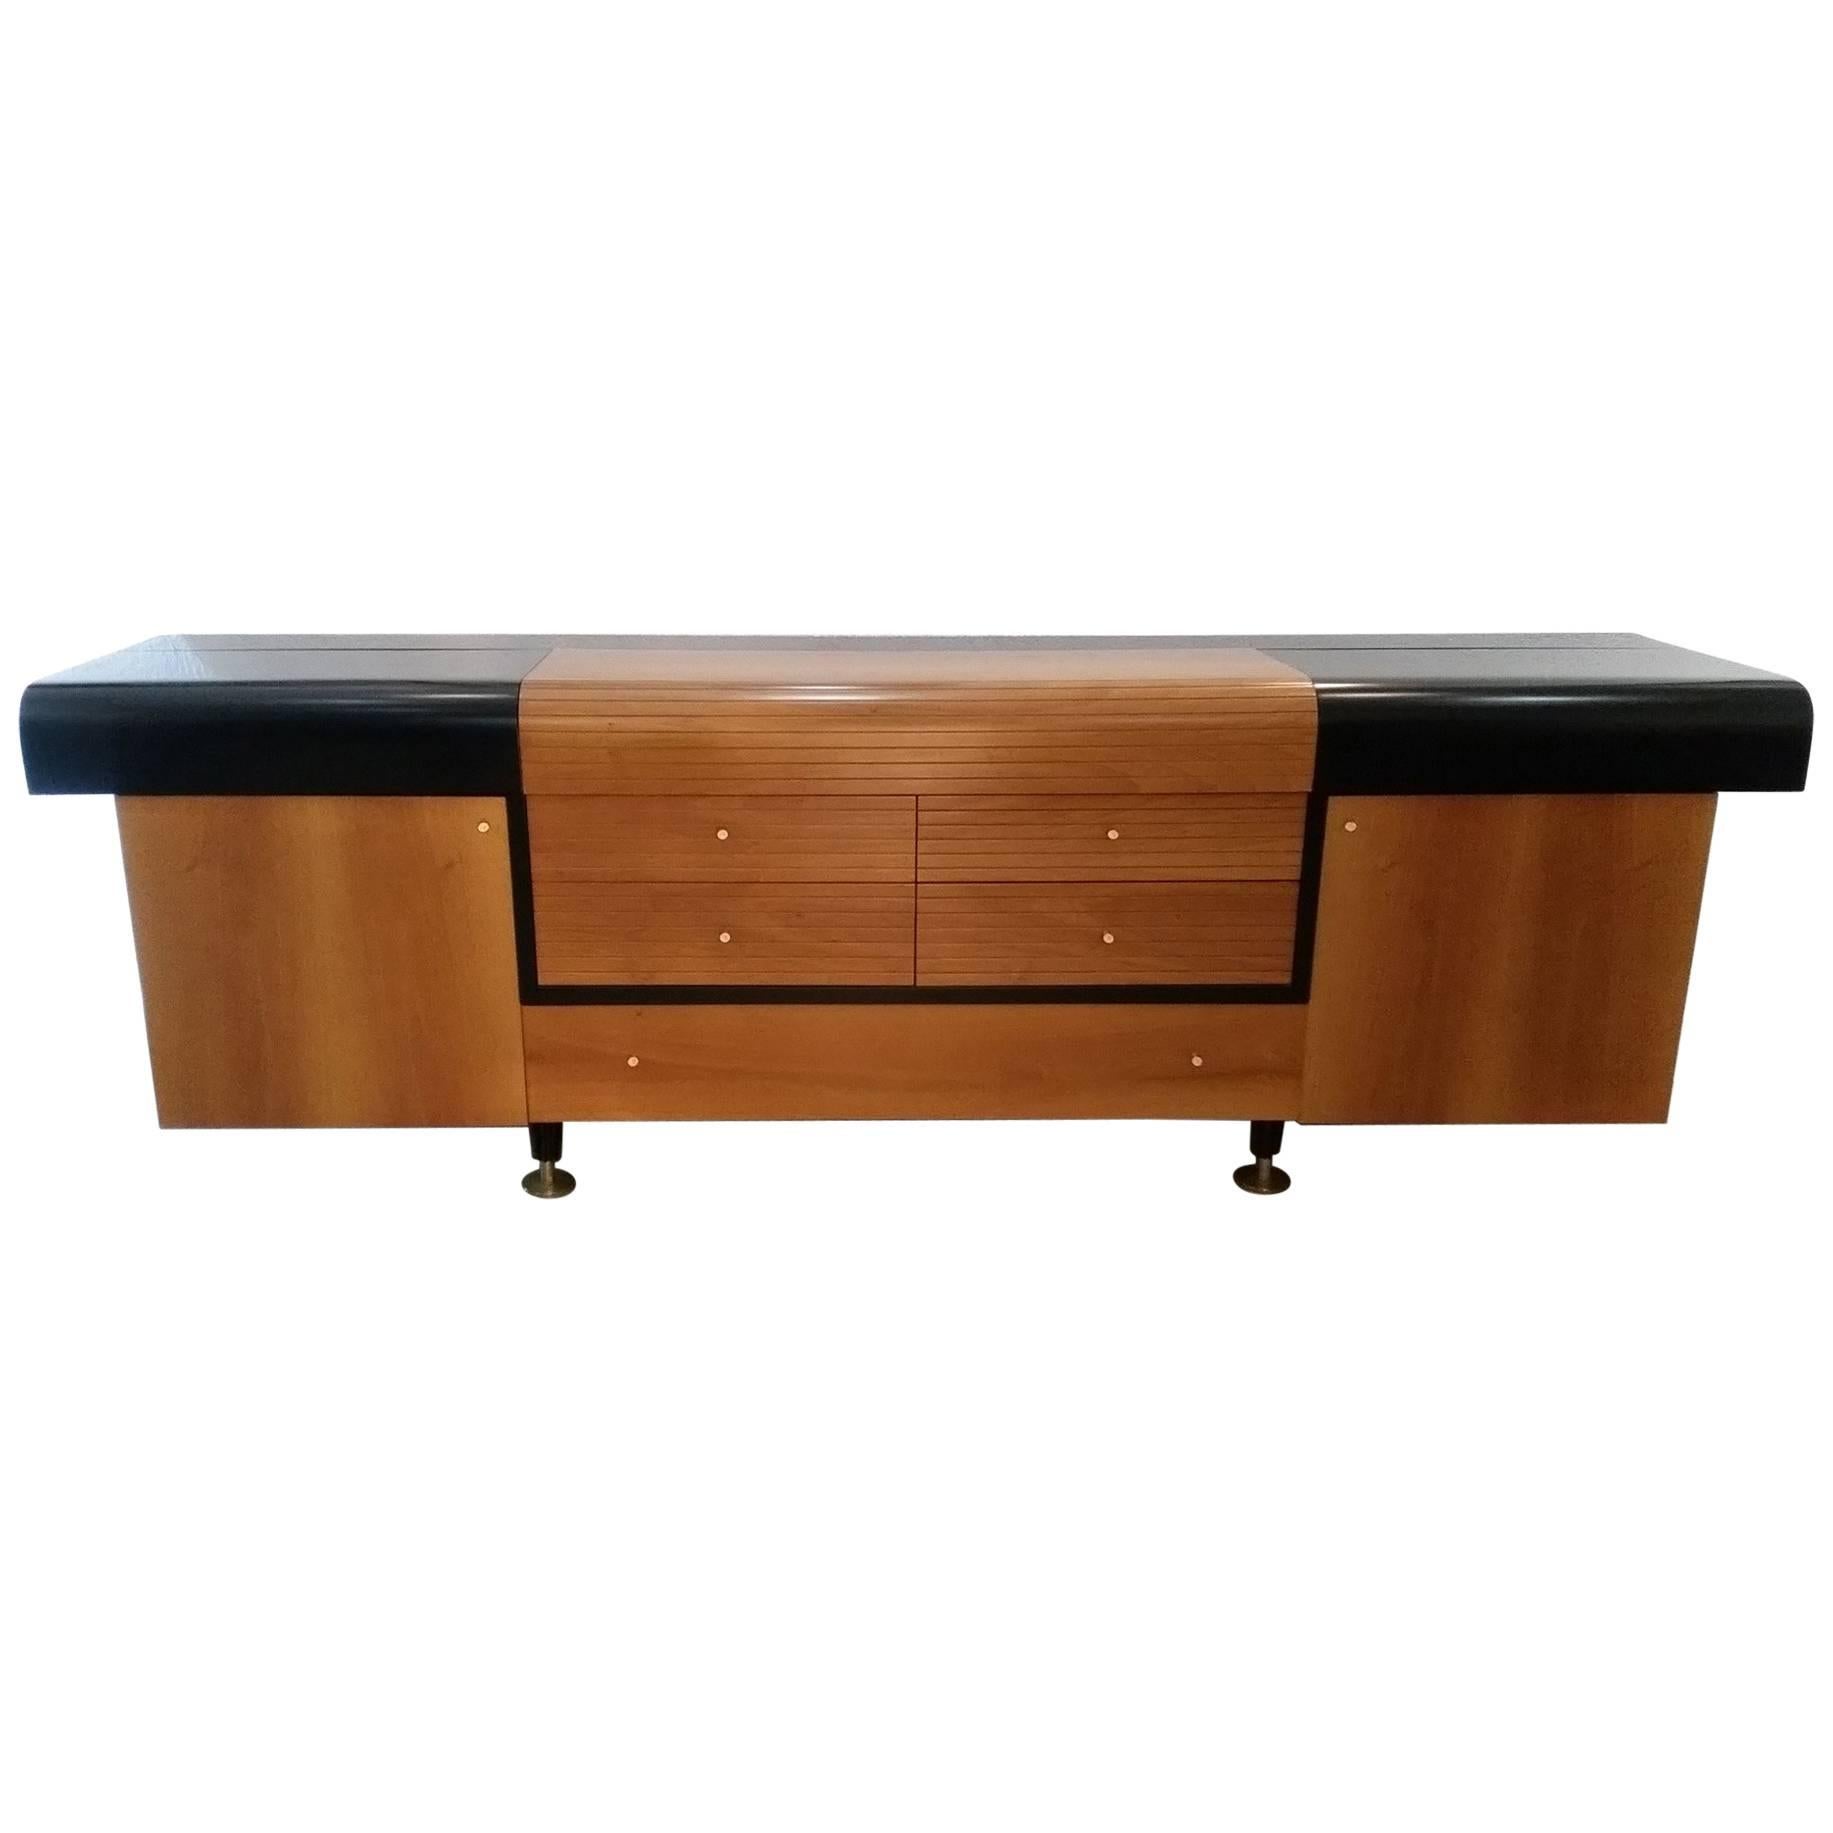 Pierre Cardin Vintage Sideboard Black Lacquered Wood and Teak, circa 1980